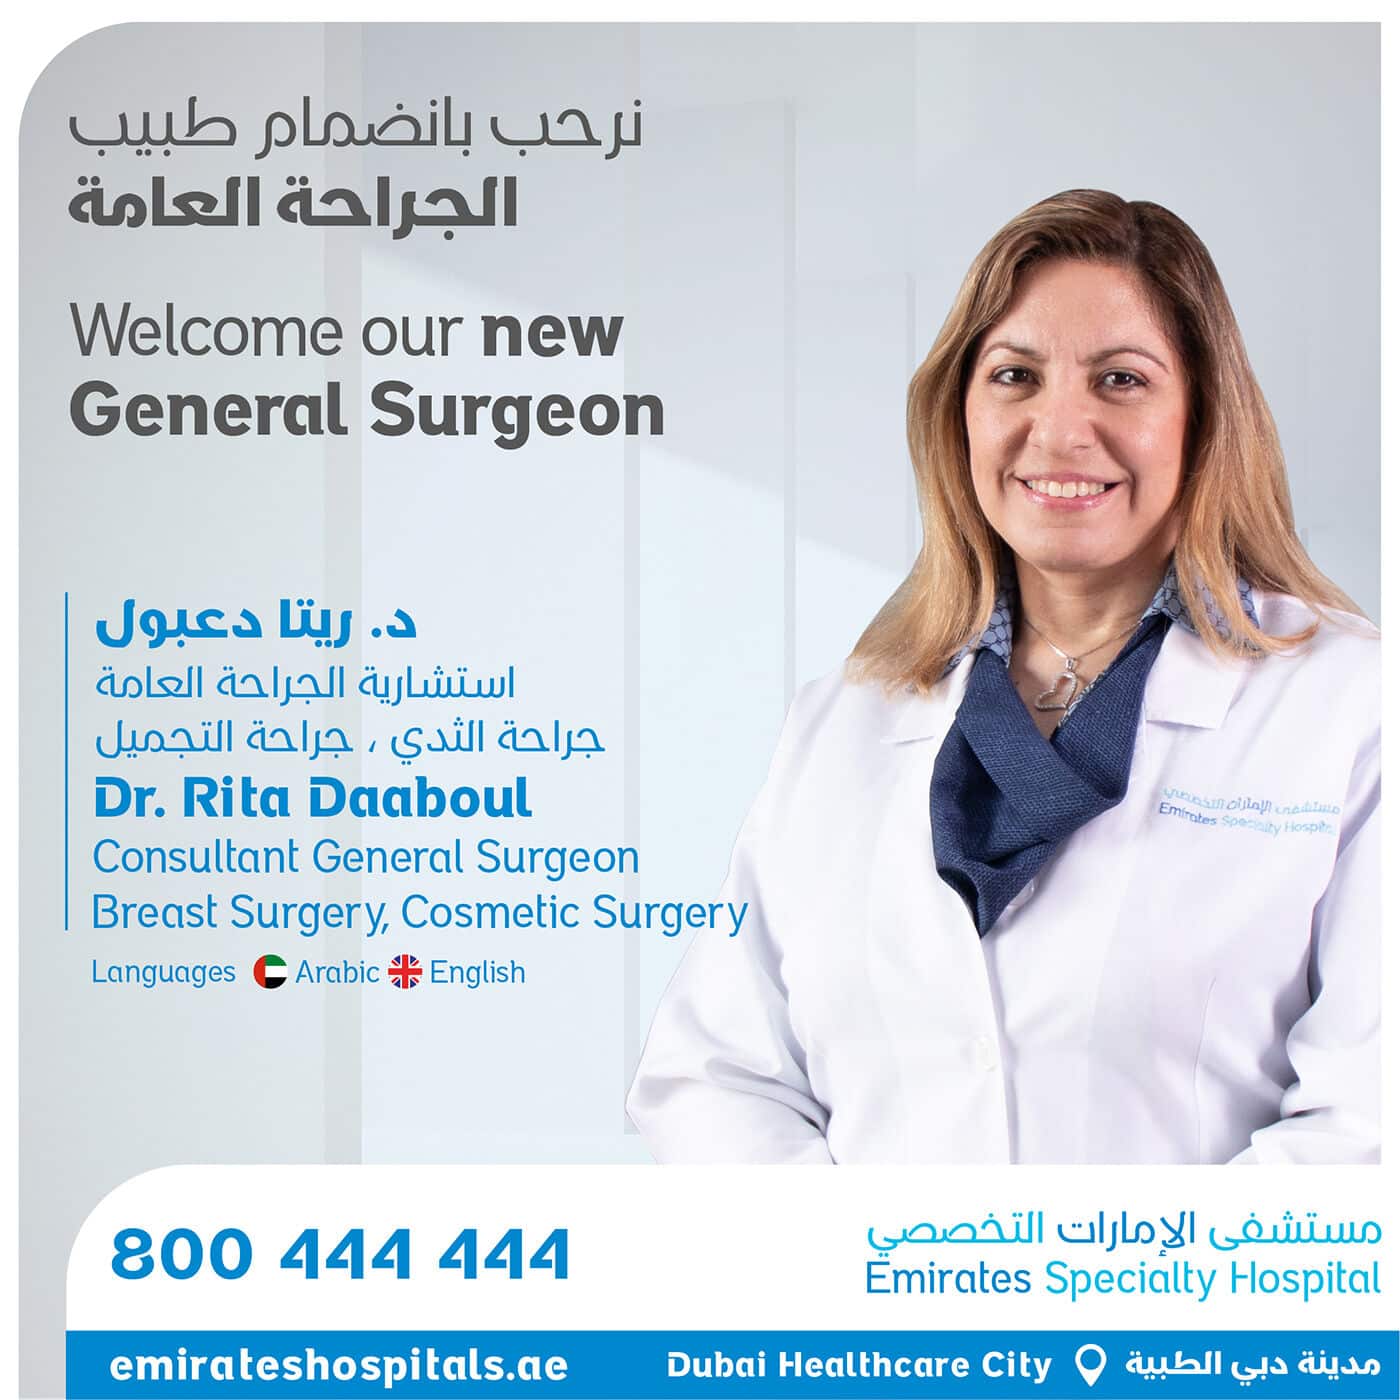 Dr. Rita Daaboul , Consultant General Surgeon , Joined Emirates Specialty Hospital in Dubai Healthcare City